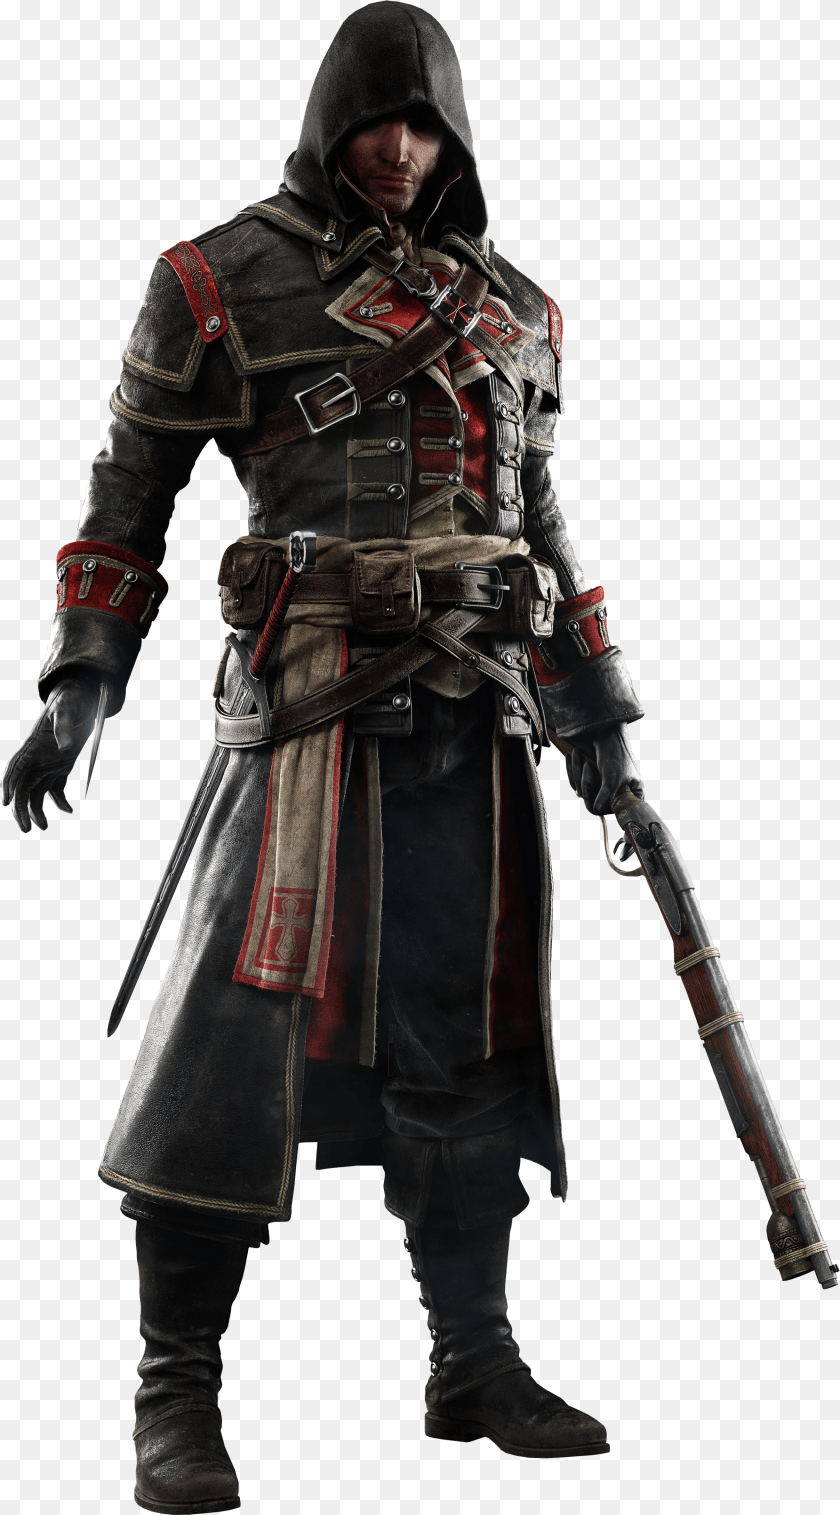 2415x4355 Shay Cormac Minecraft Skin Assassins Creed Rogue, Stencil, Bow, Weapon, Food Clipart PNG